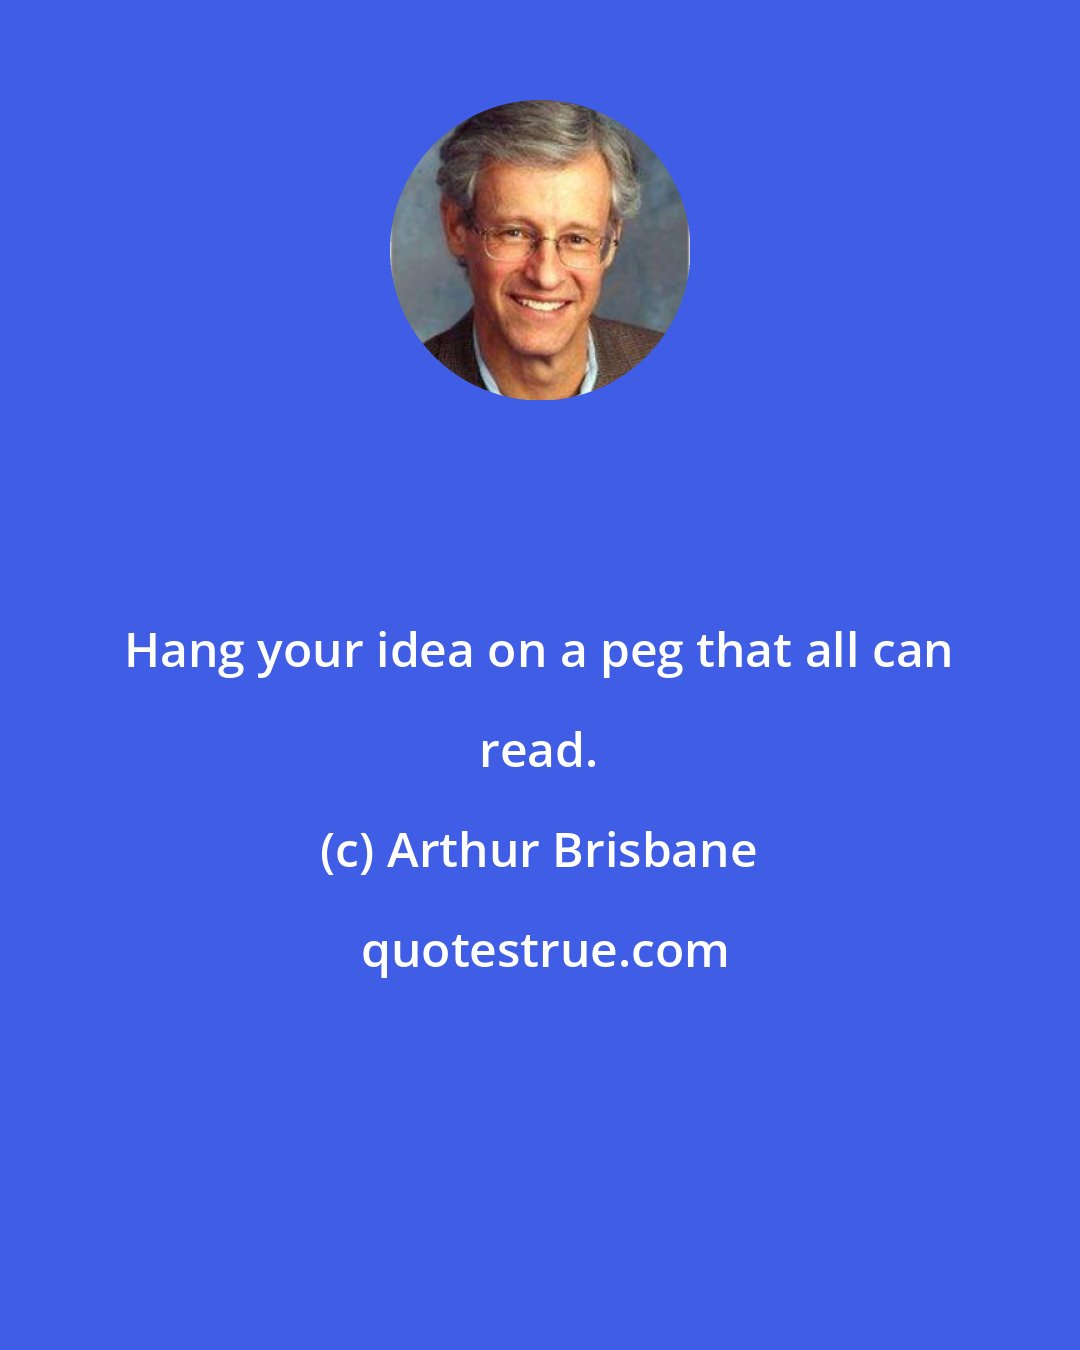 Arthur Brisbane: Hang your idea on a peg that all can read.